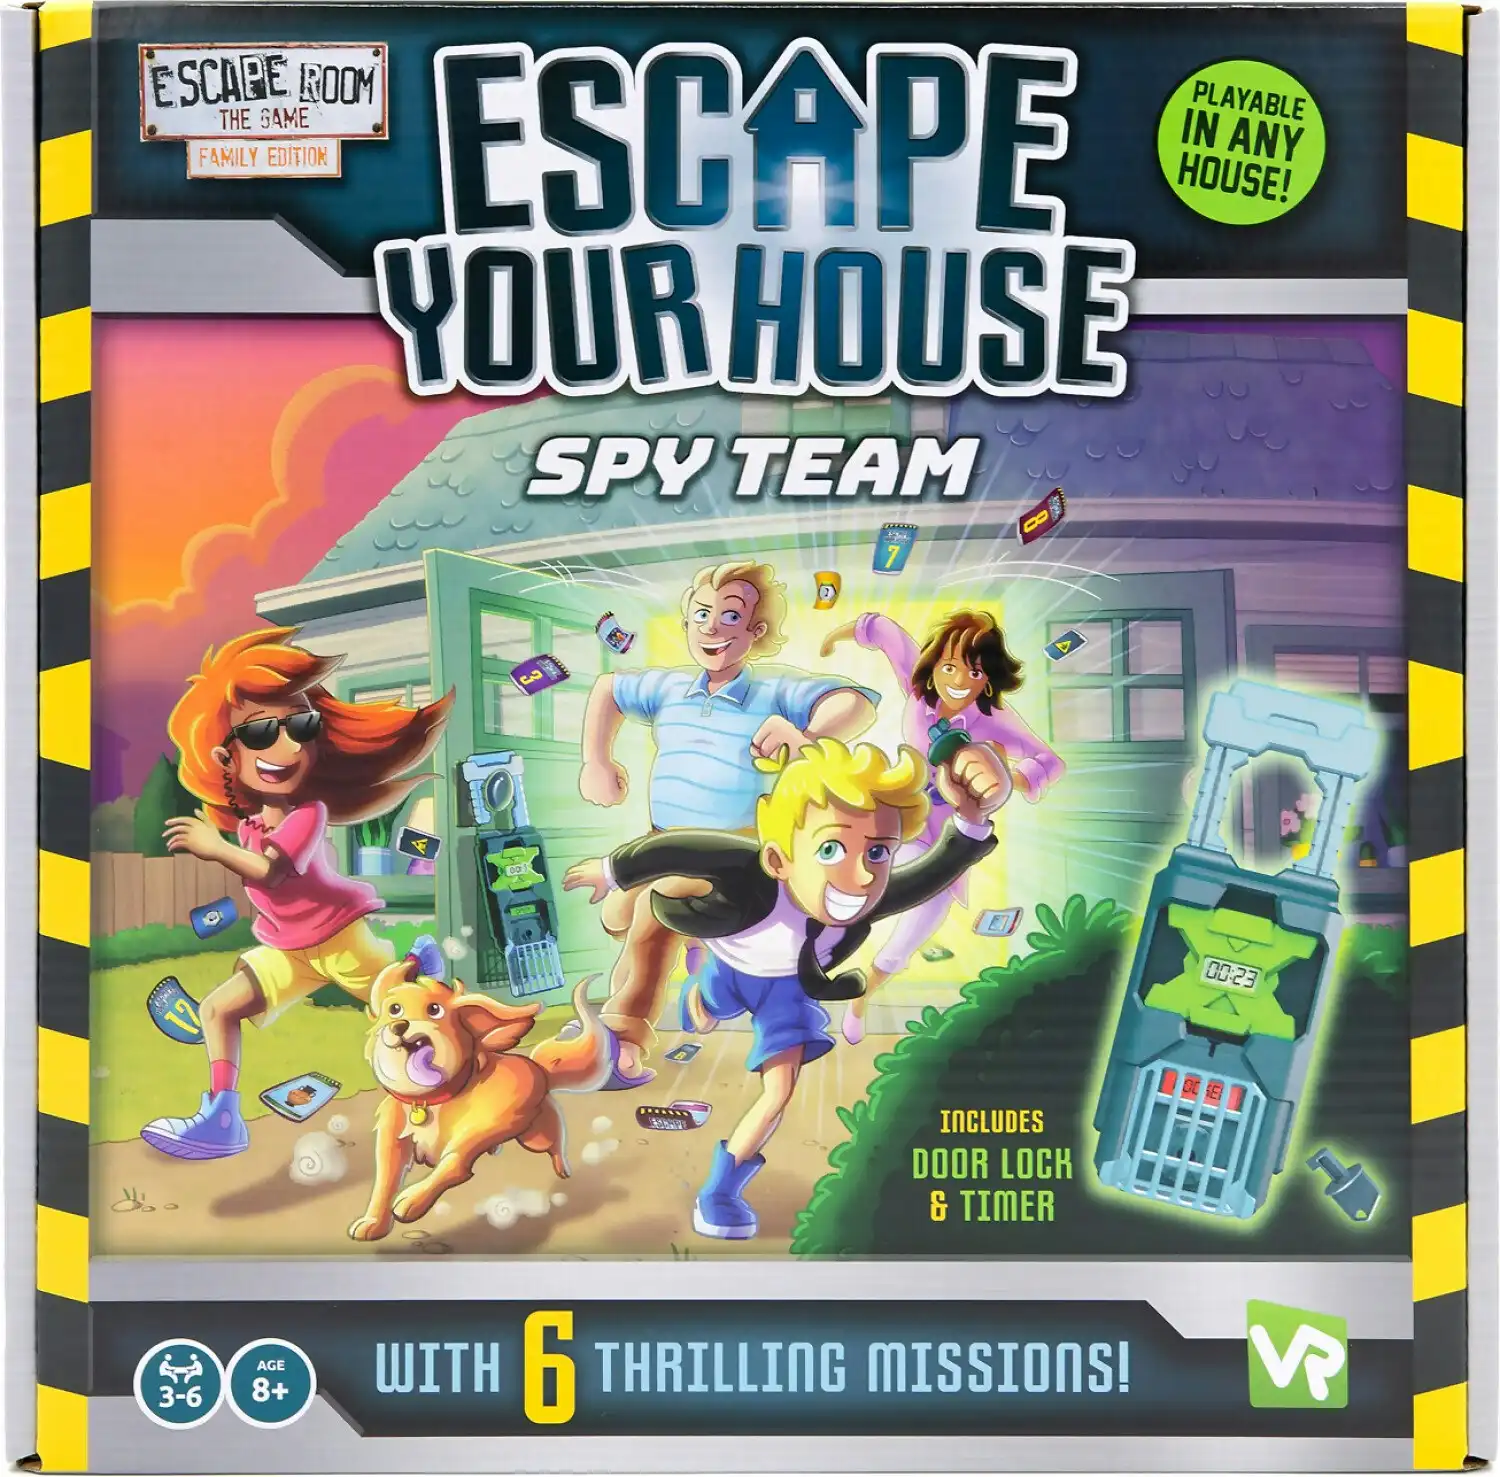 Escape Room The Game - Escape Your House - Identity Games